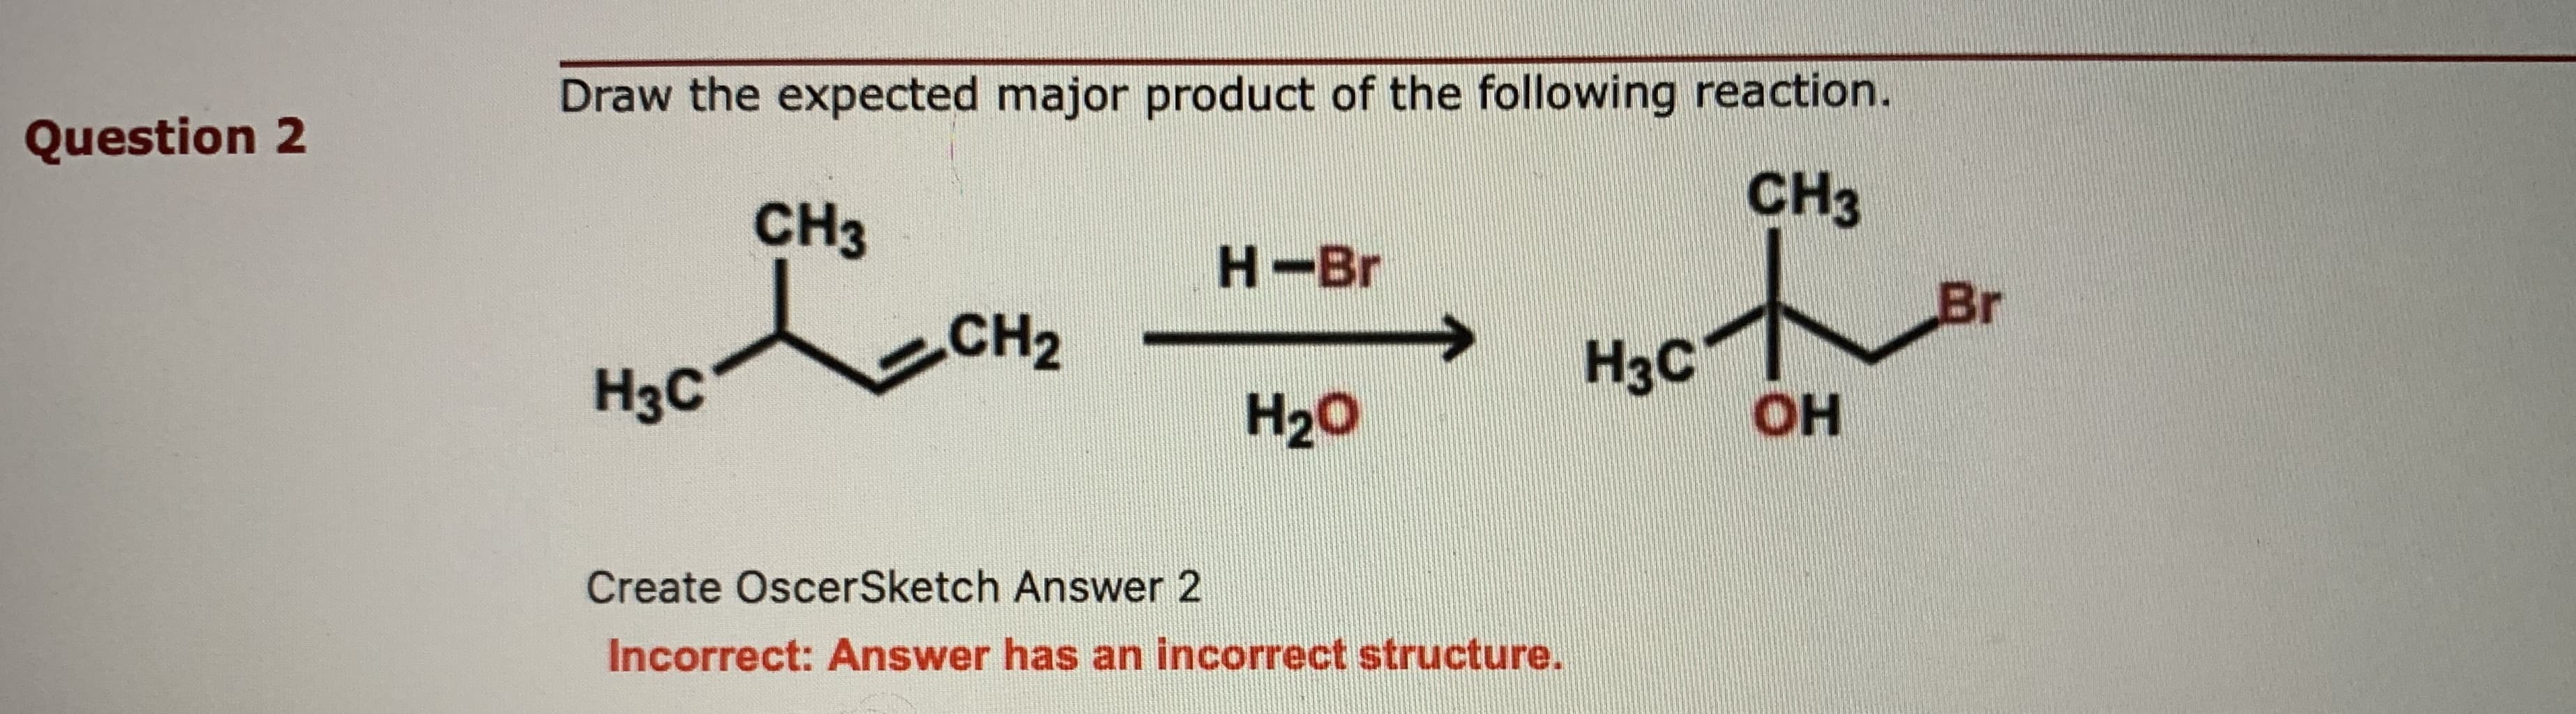 Draw the expected major product of the following reaction.
CH3
CH3
H-Br
Br
CH2
H3C
H3C
OH
H20
